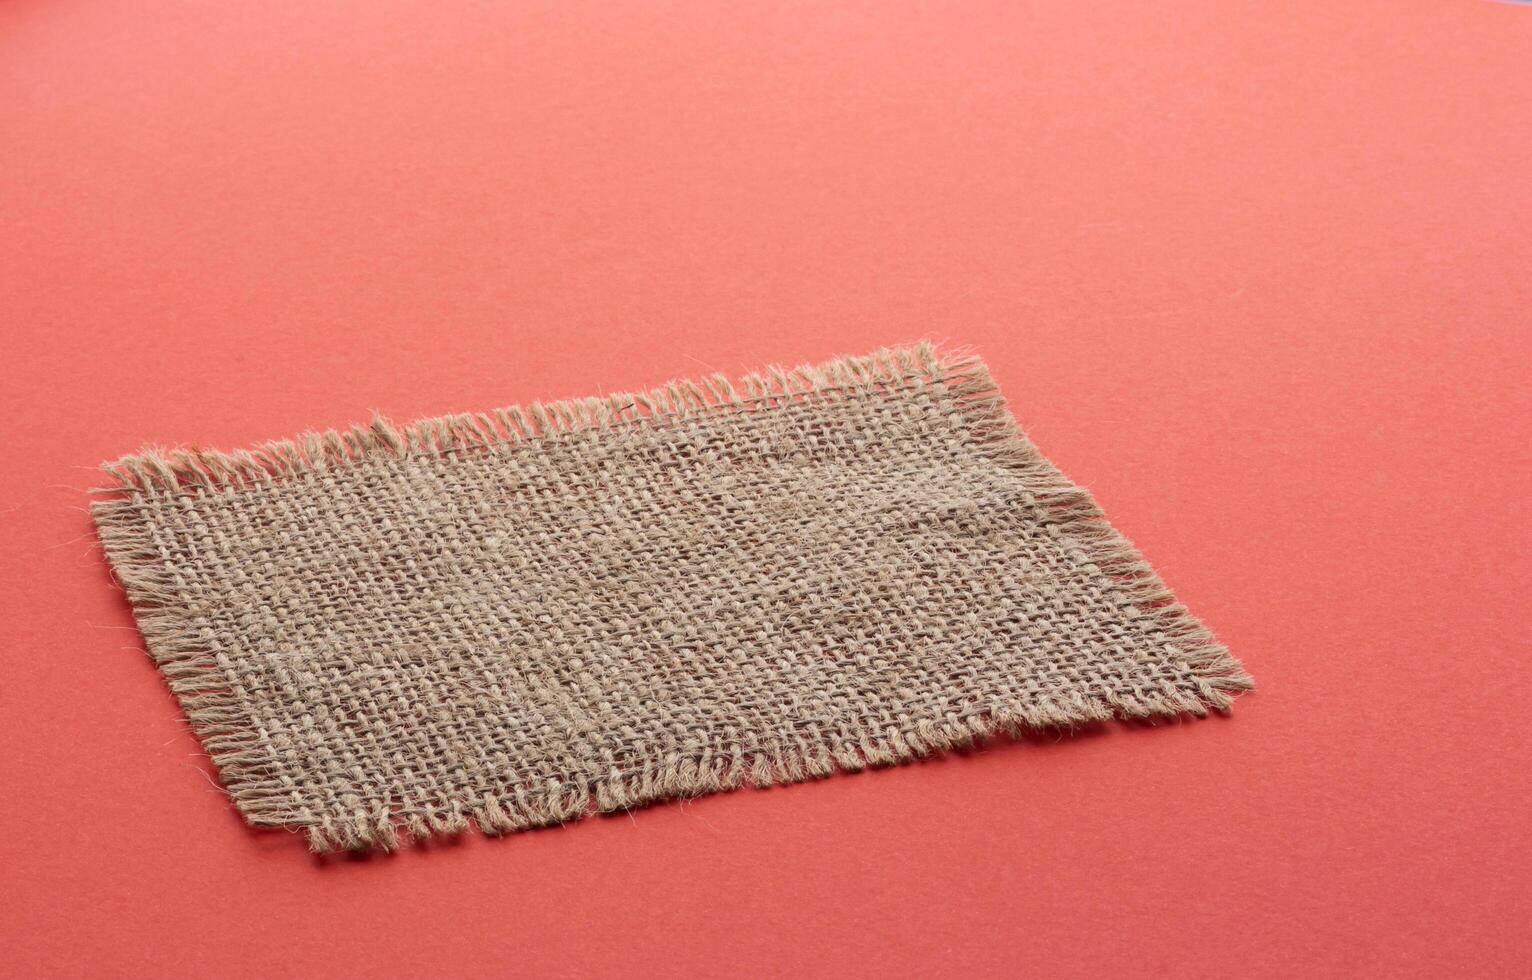 Burlap napkin on red color background photo